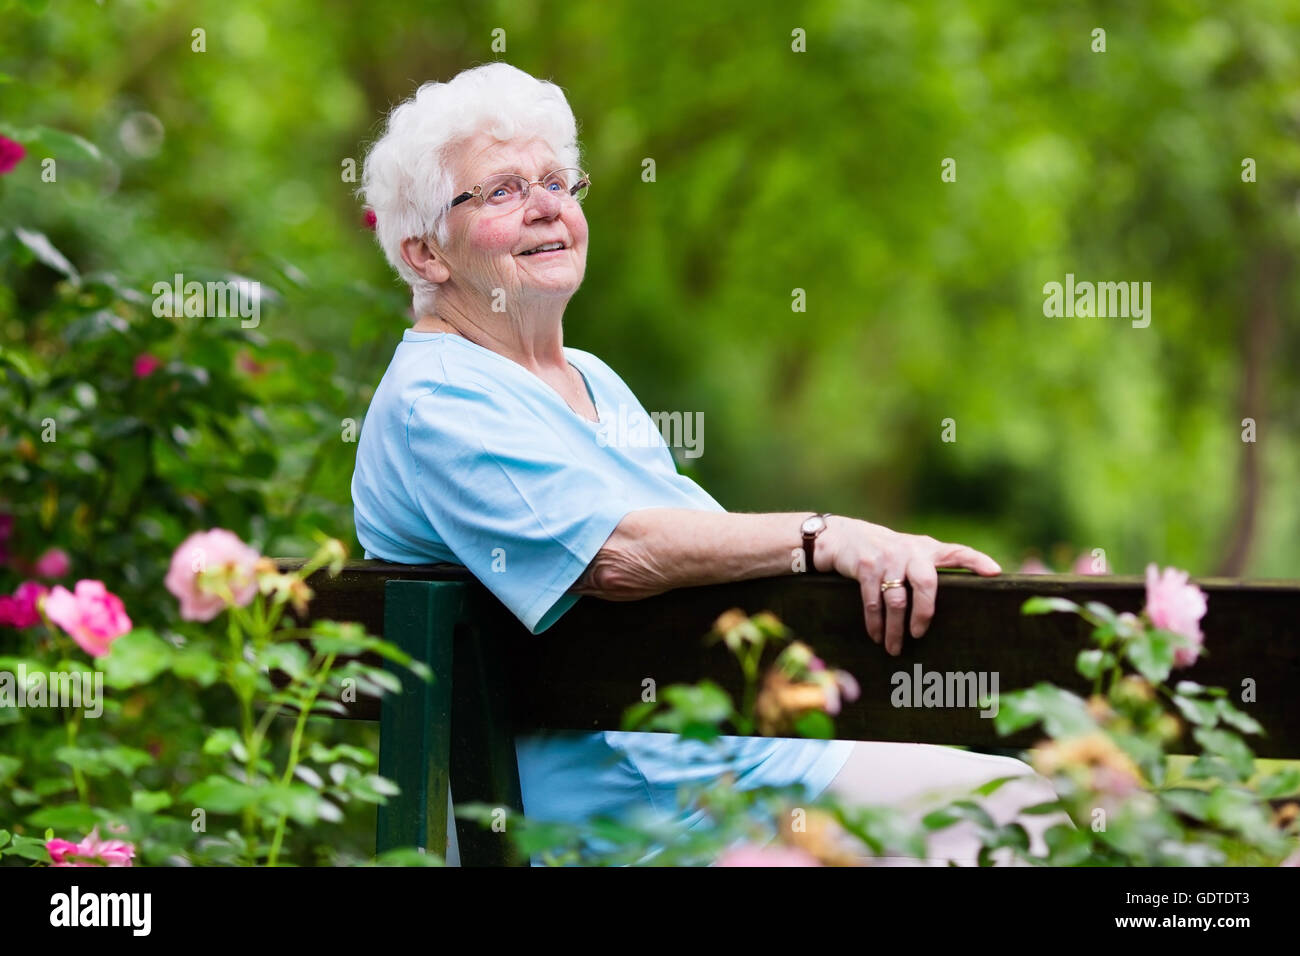 Happy senior handicapped lady with a walking disability enjoying a walk in a sunny park pushing her walker or wheel chair Stock Photo